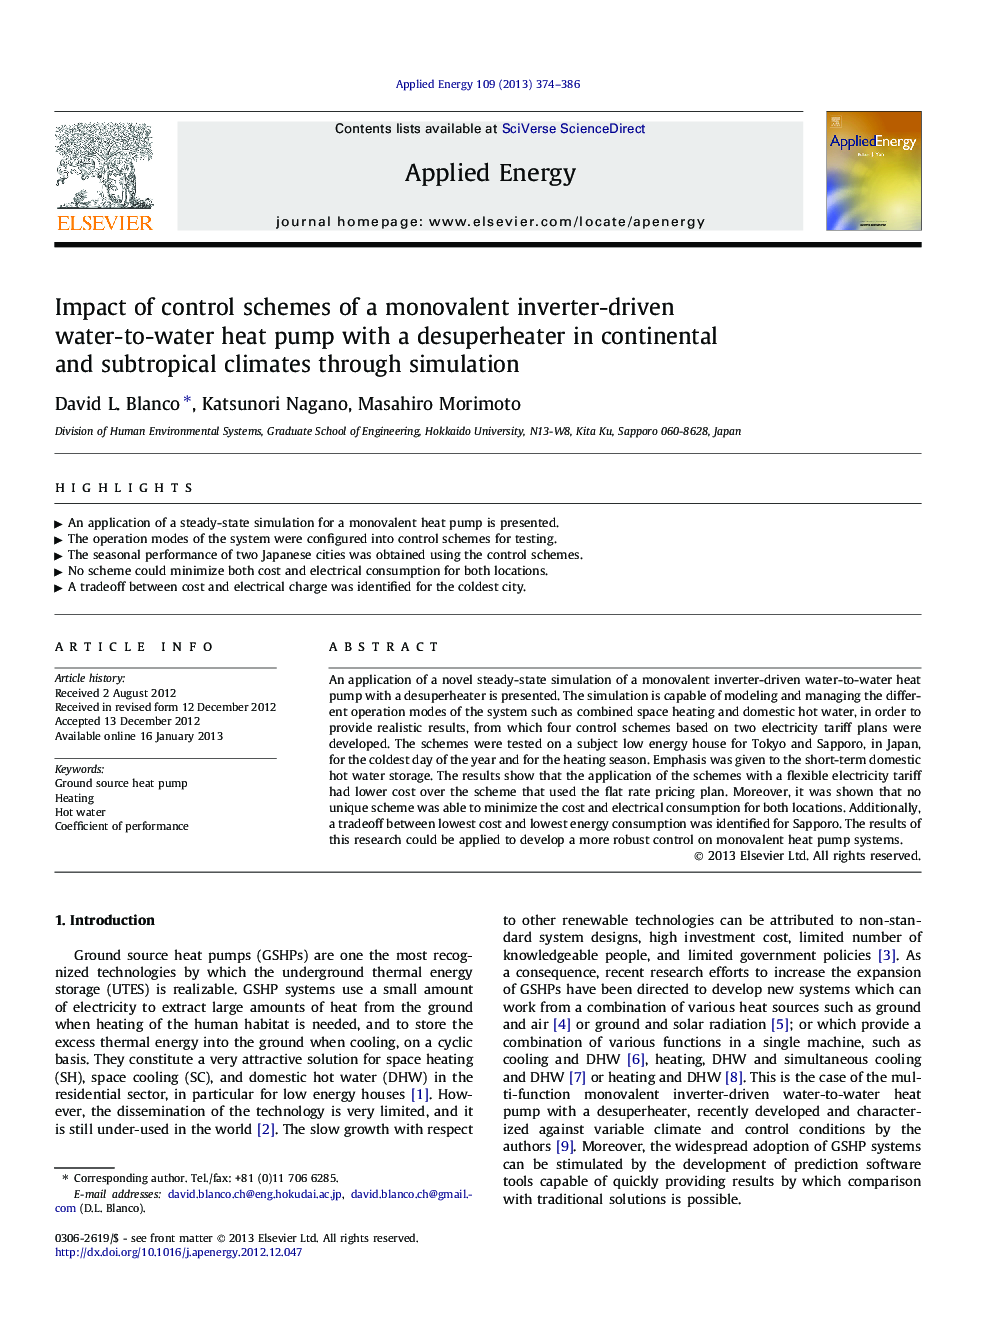 Impact of control schemes of a monovalent inverter-driven water-to-water heat pump with a desuperheater in continental and subtropical climates through simulation